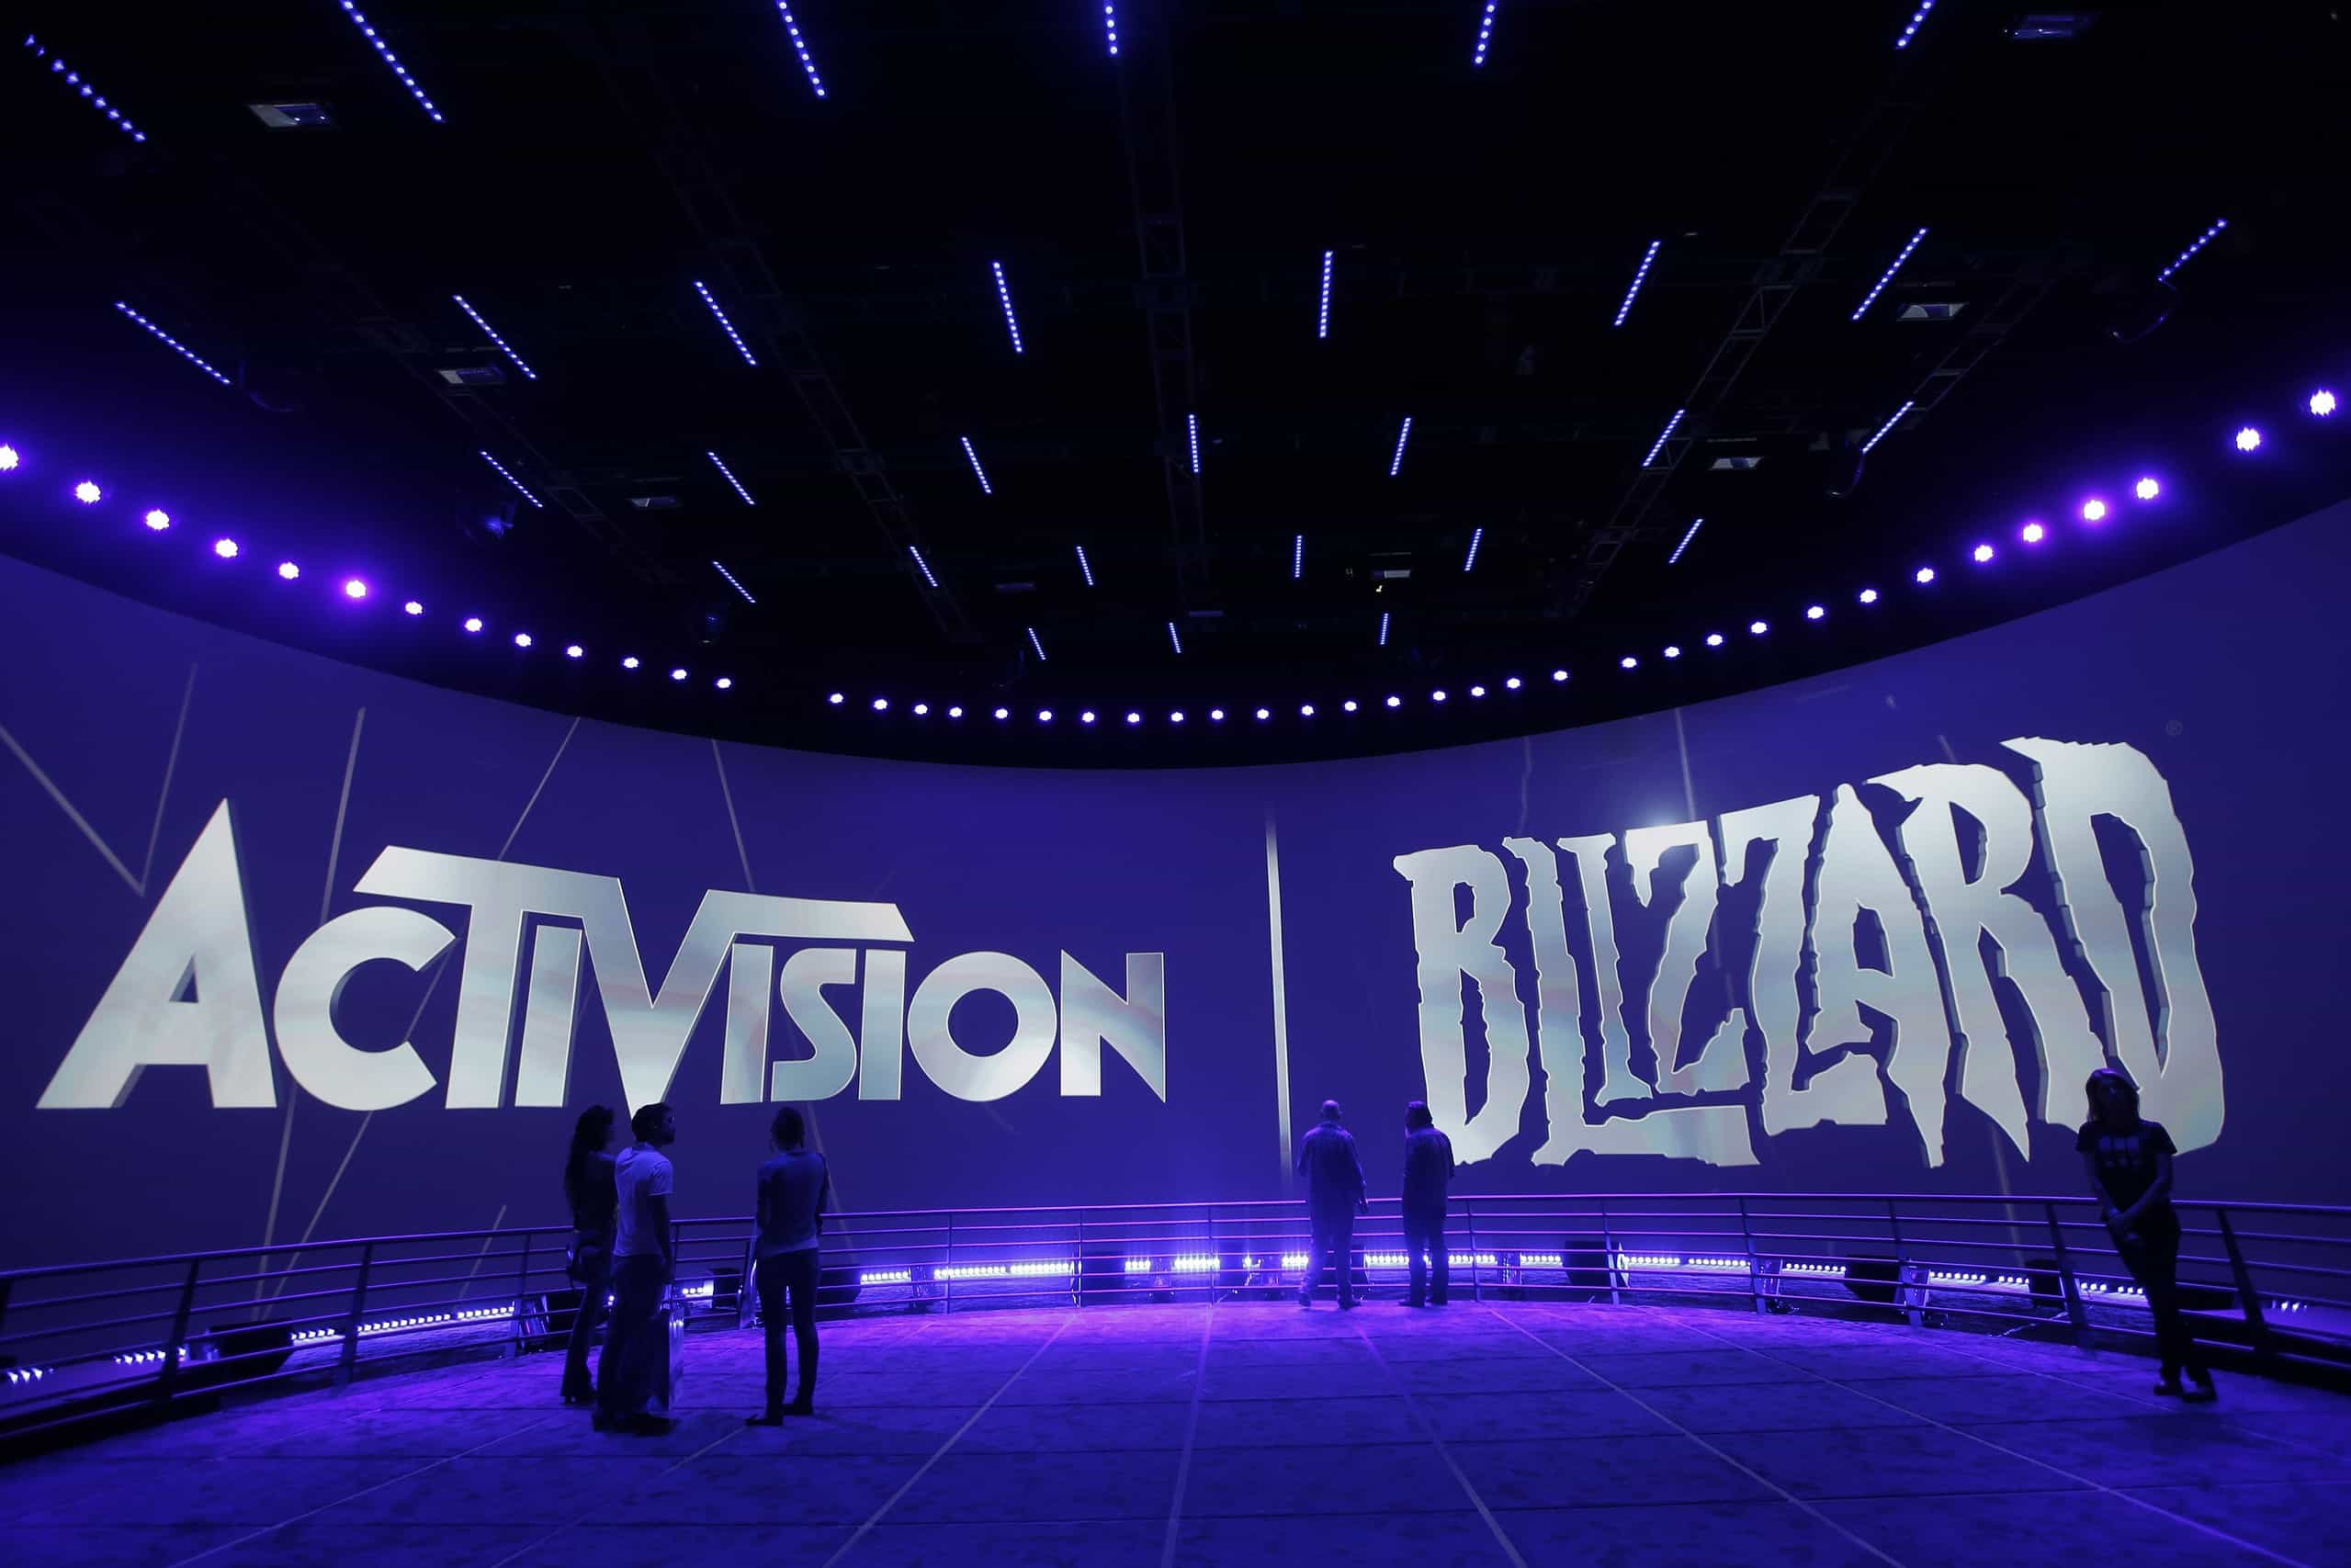 Activision exec says UK regulator’s concerns over Microsoft acquisition focus only on Sony